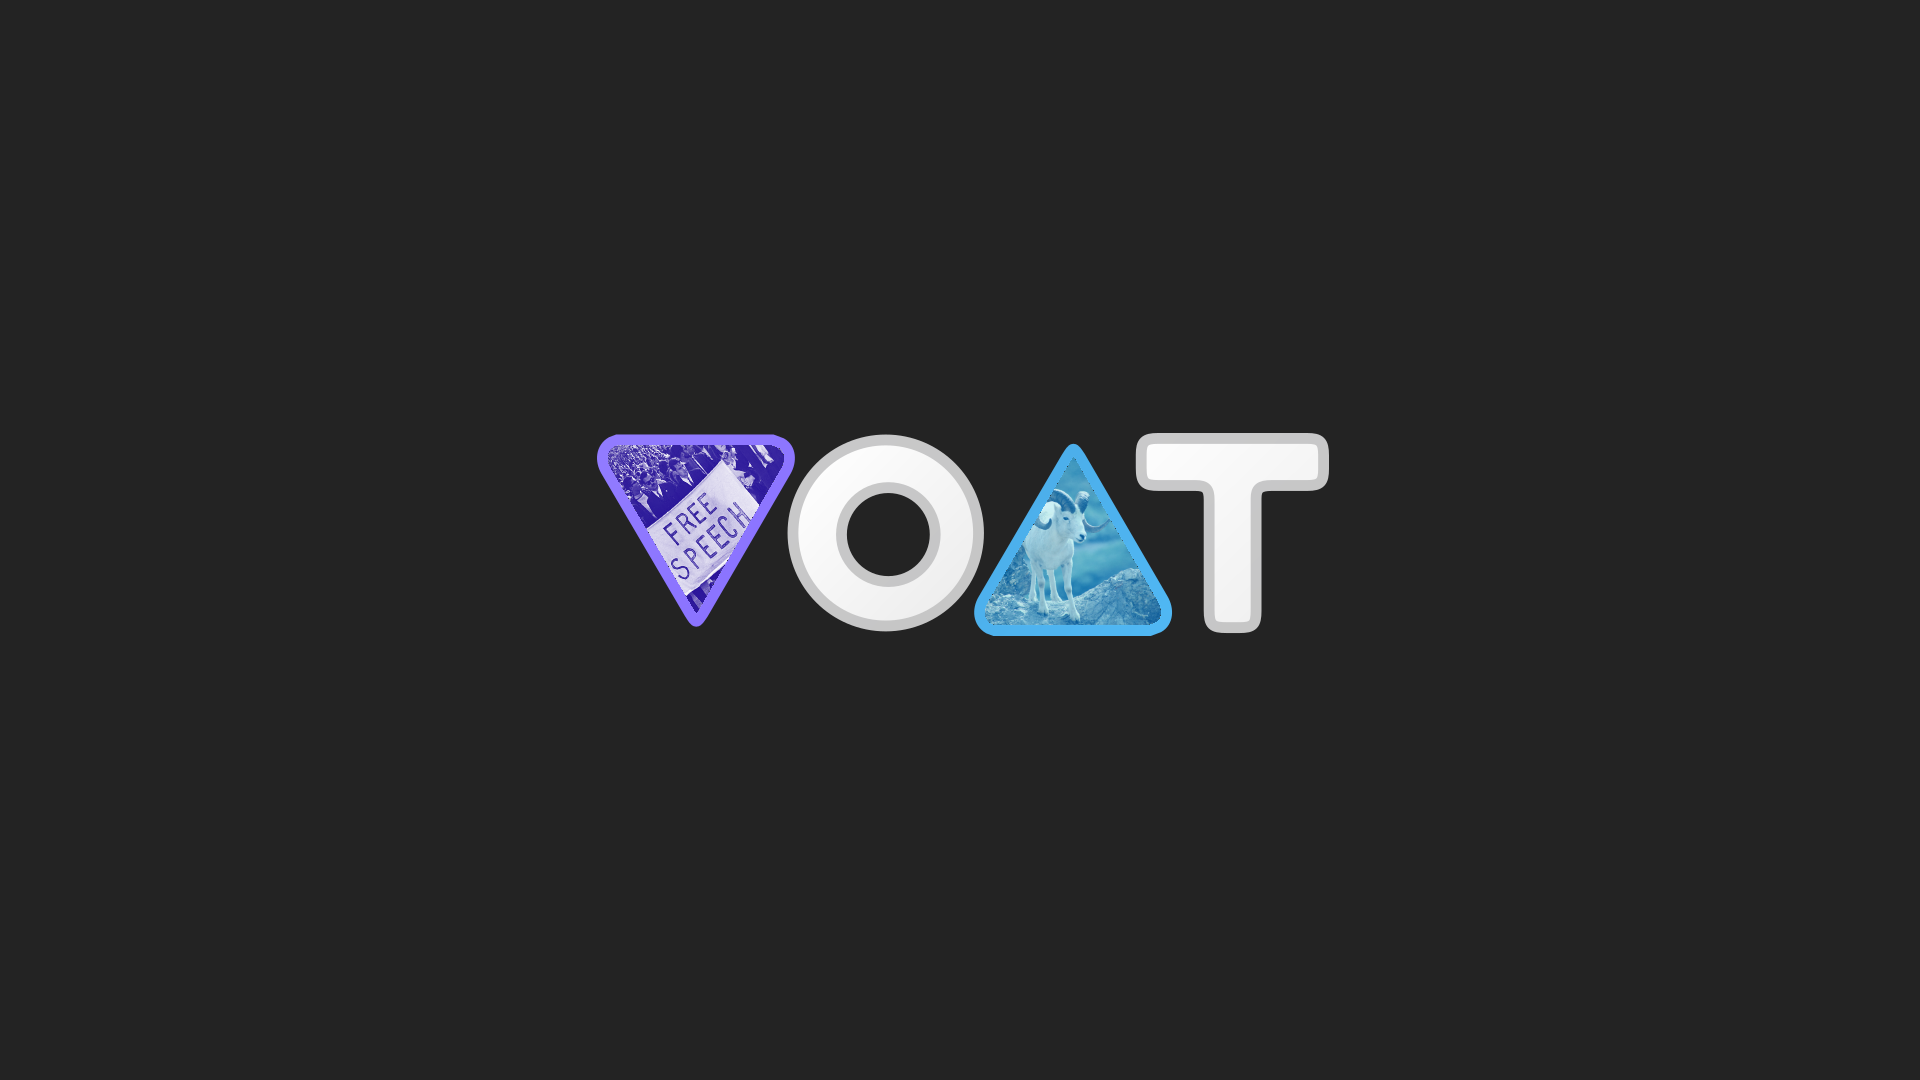 voat.co